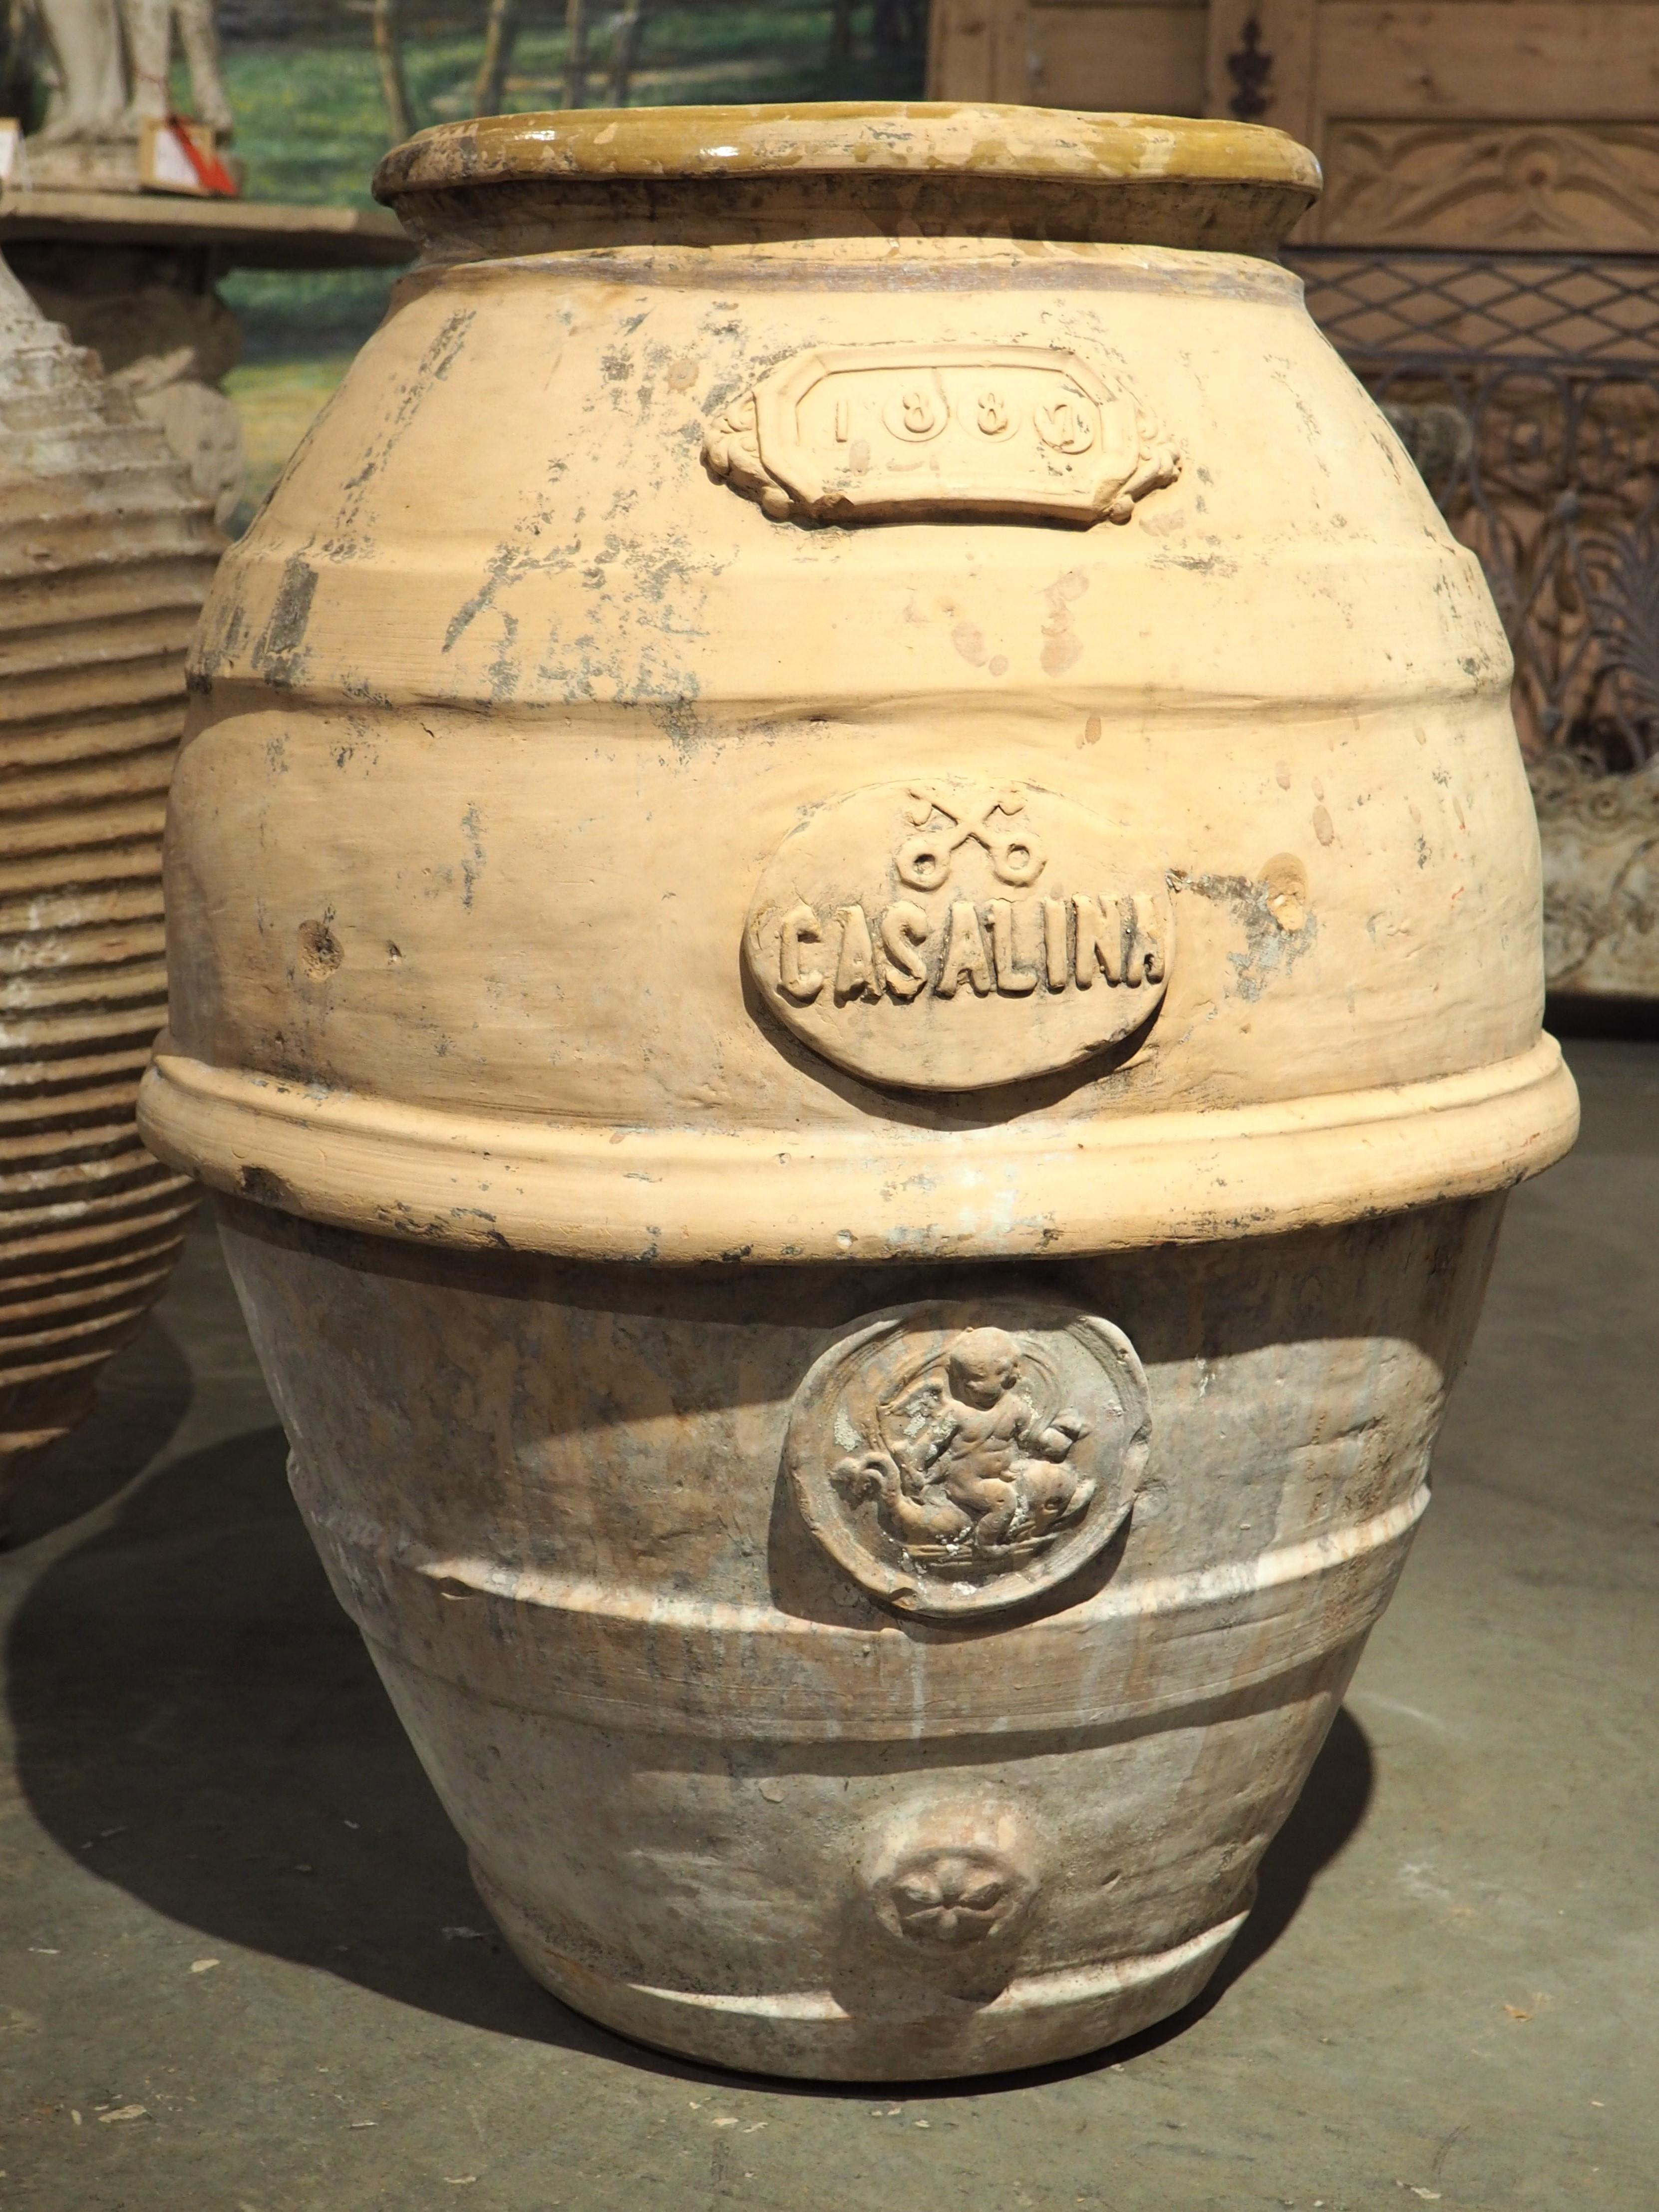 Antique Terra Cotta Oil or Grains Jar from Casalina, Italy, Dated 1887 7